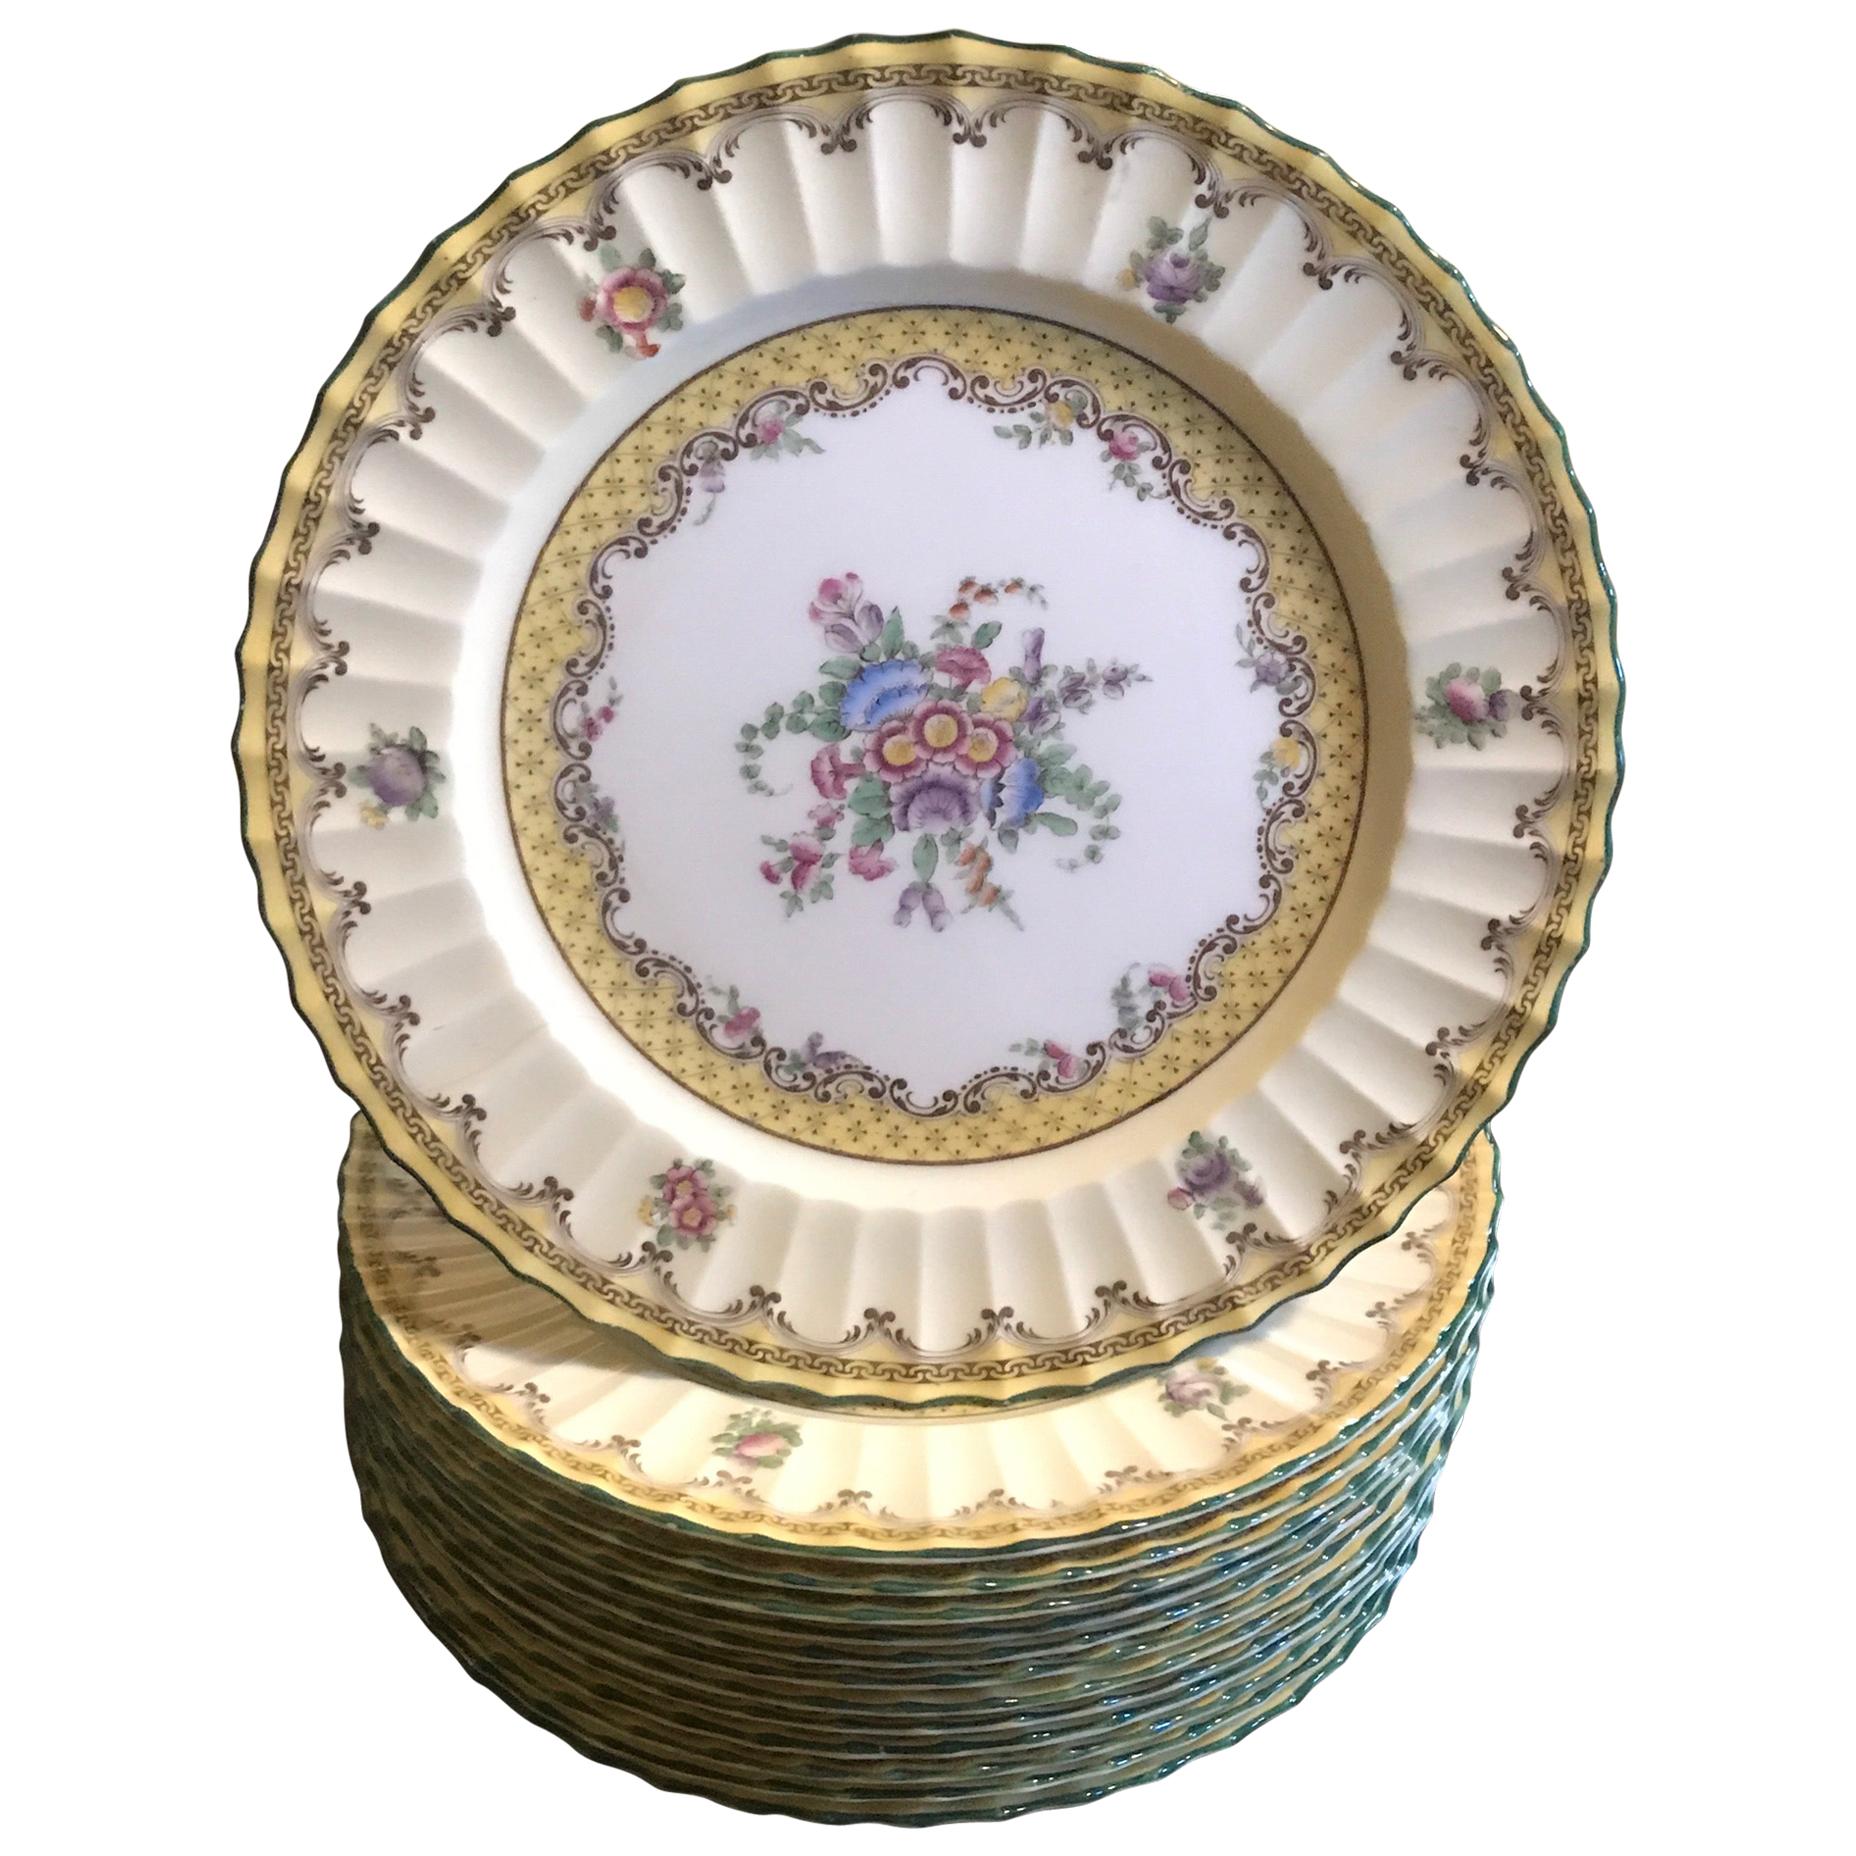 Set of 12 English Floral Service Dinner Plates by Royal Worcester